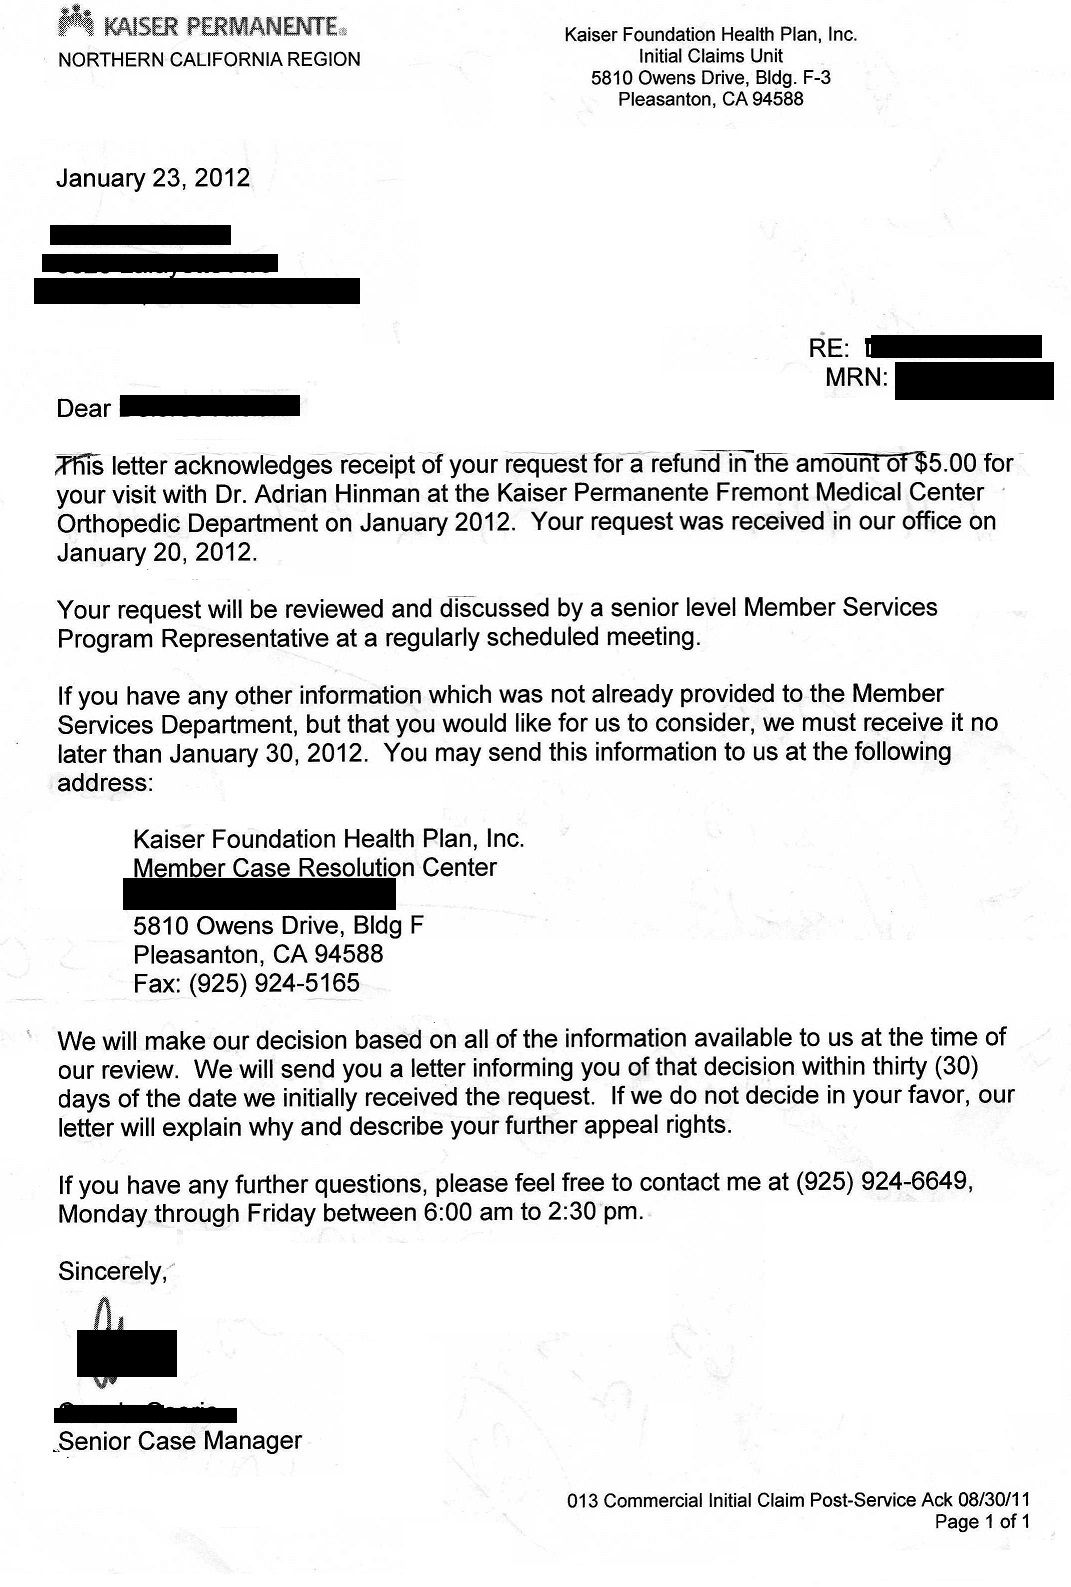 Letter from Membership Services January 23, 2012.